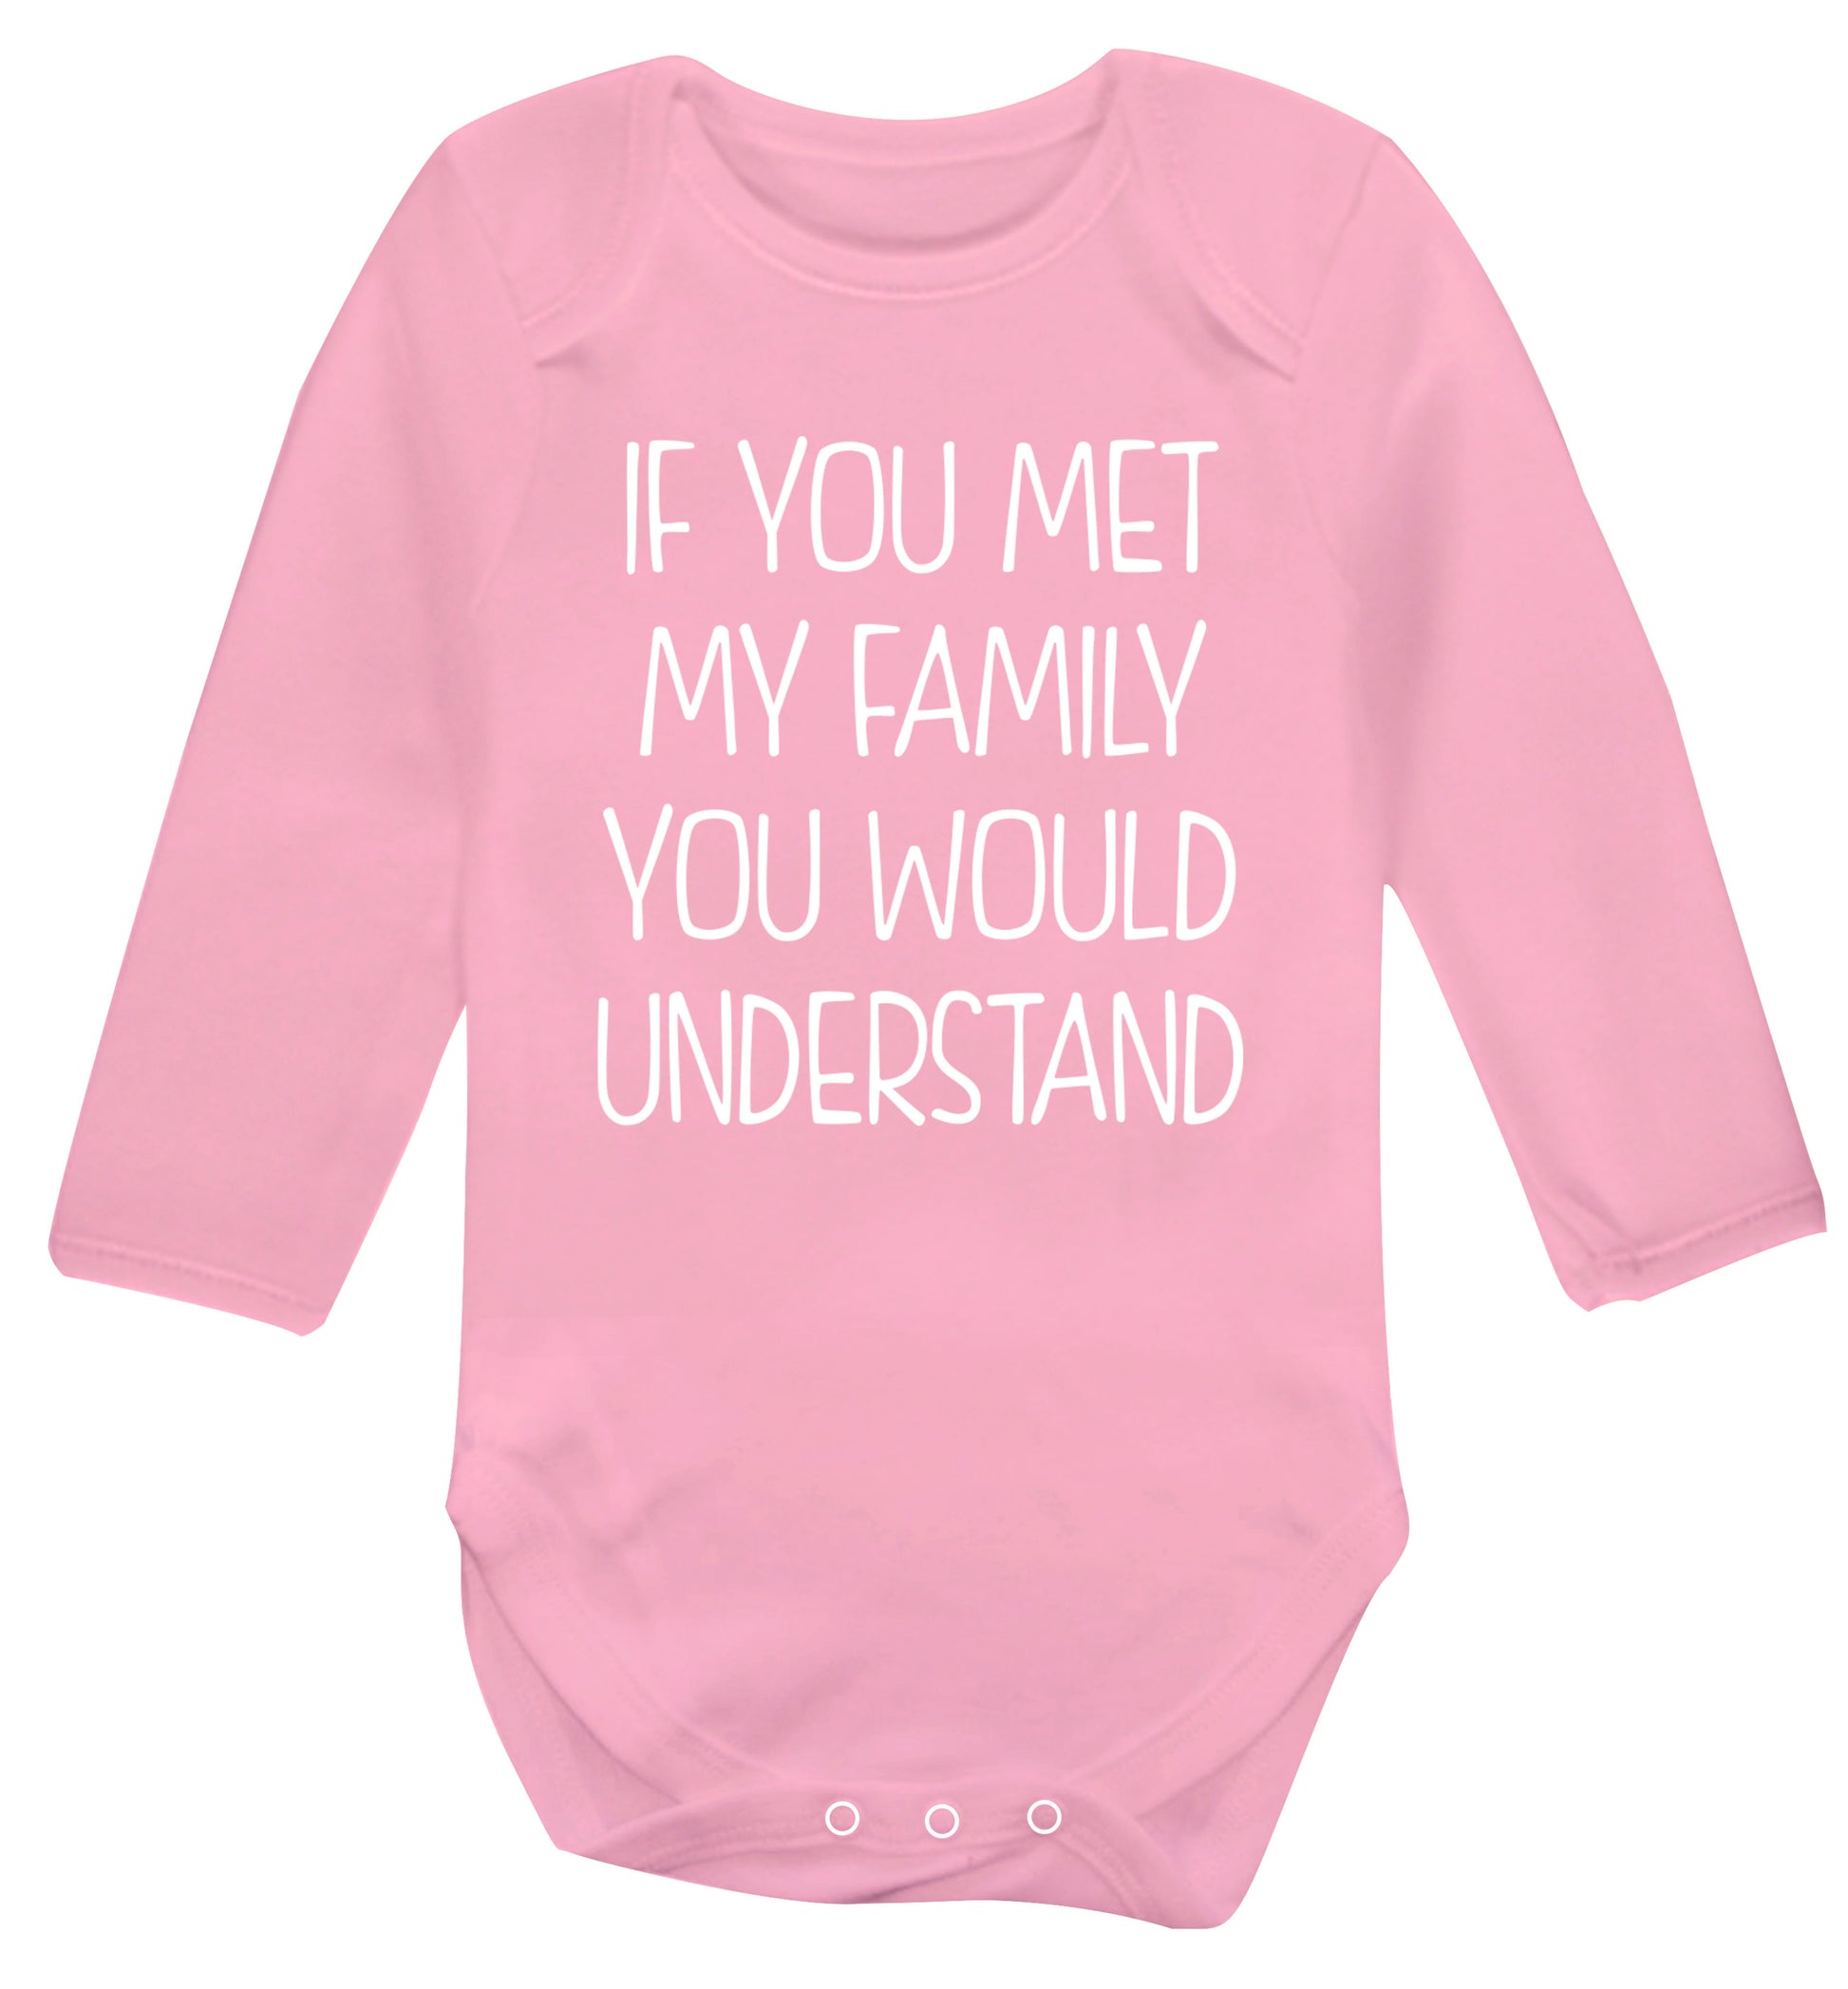 If you met my family you would understand Baby Vest long sleeved pale pink 6-12 months